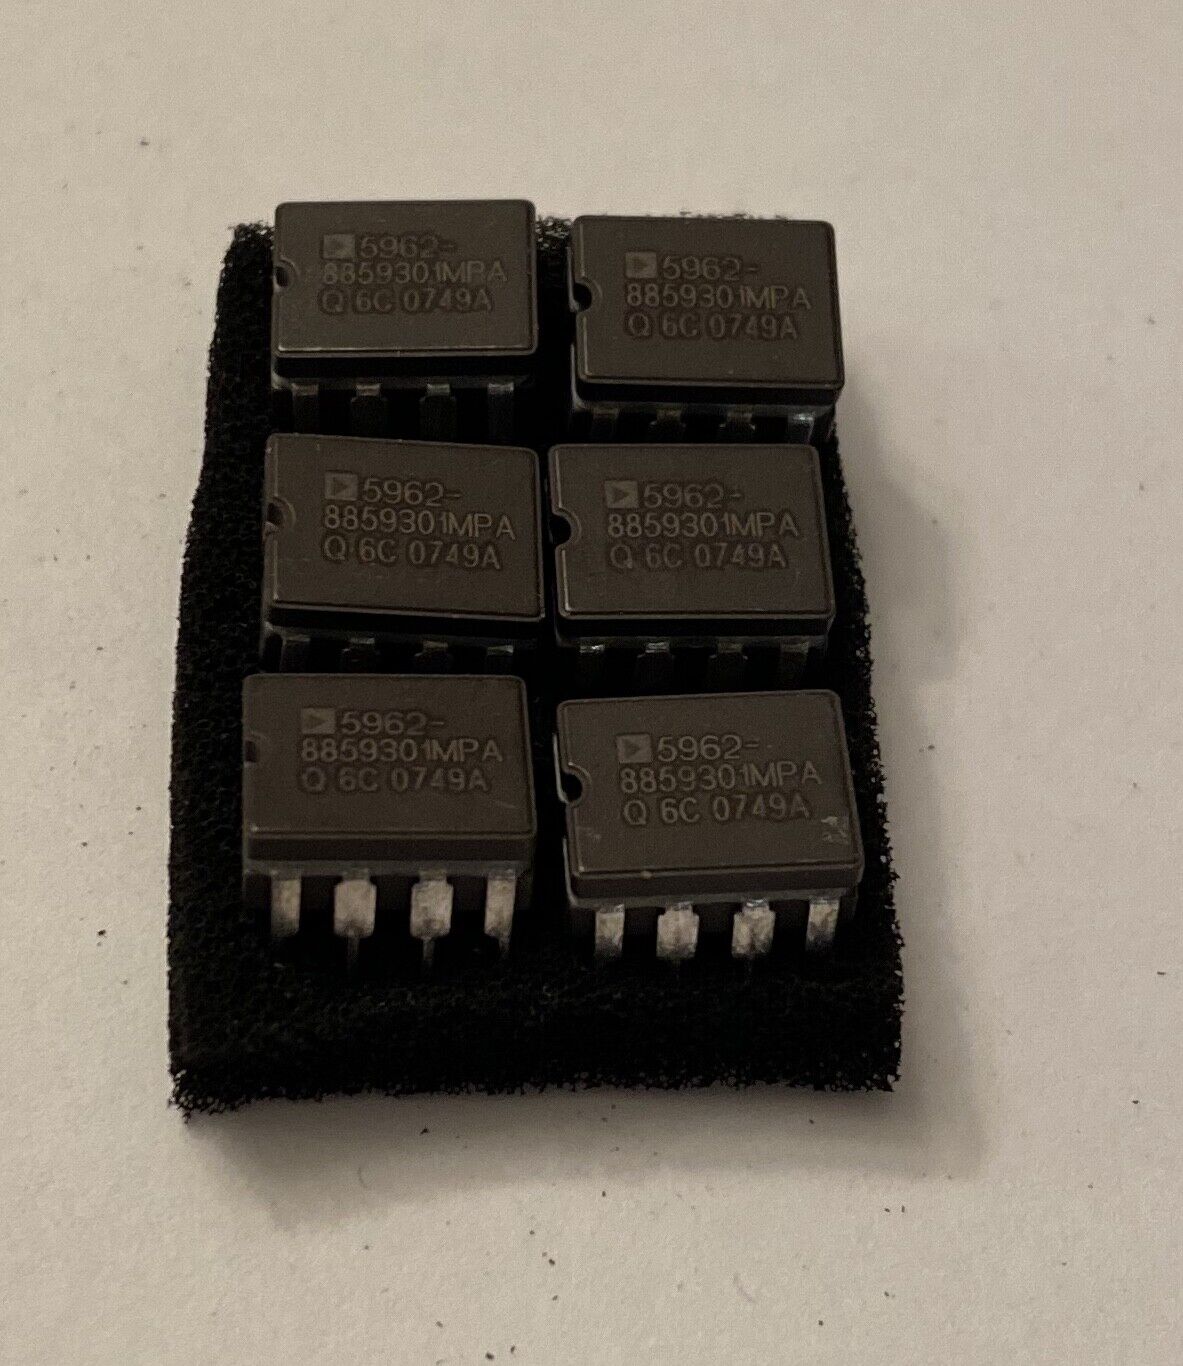 5962-8859301MPA - Dual Low Offset, Low Power Operational Amplifier